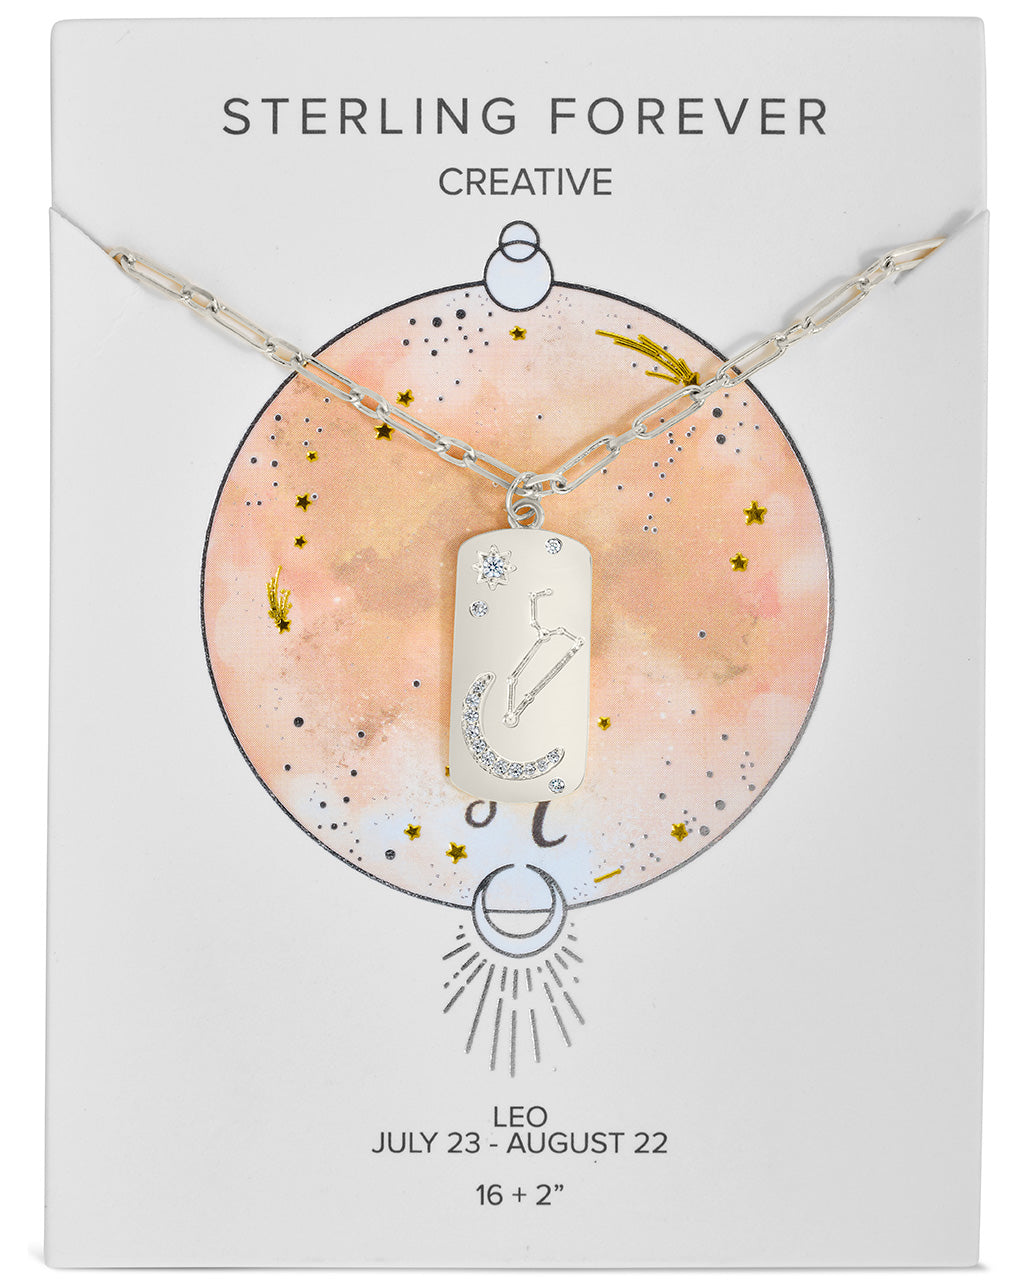 Constellation Dog Tag Necklace Necklace Sterling Forever Silver Leo (Jul 23 - Aug 22) 